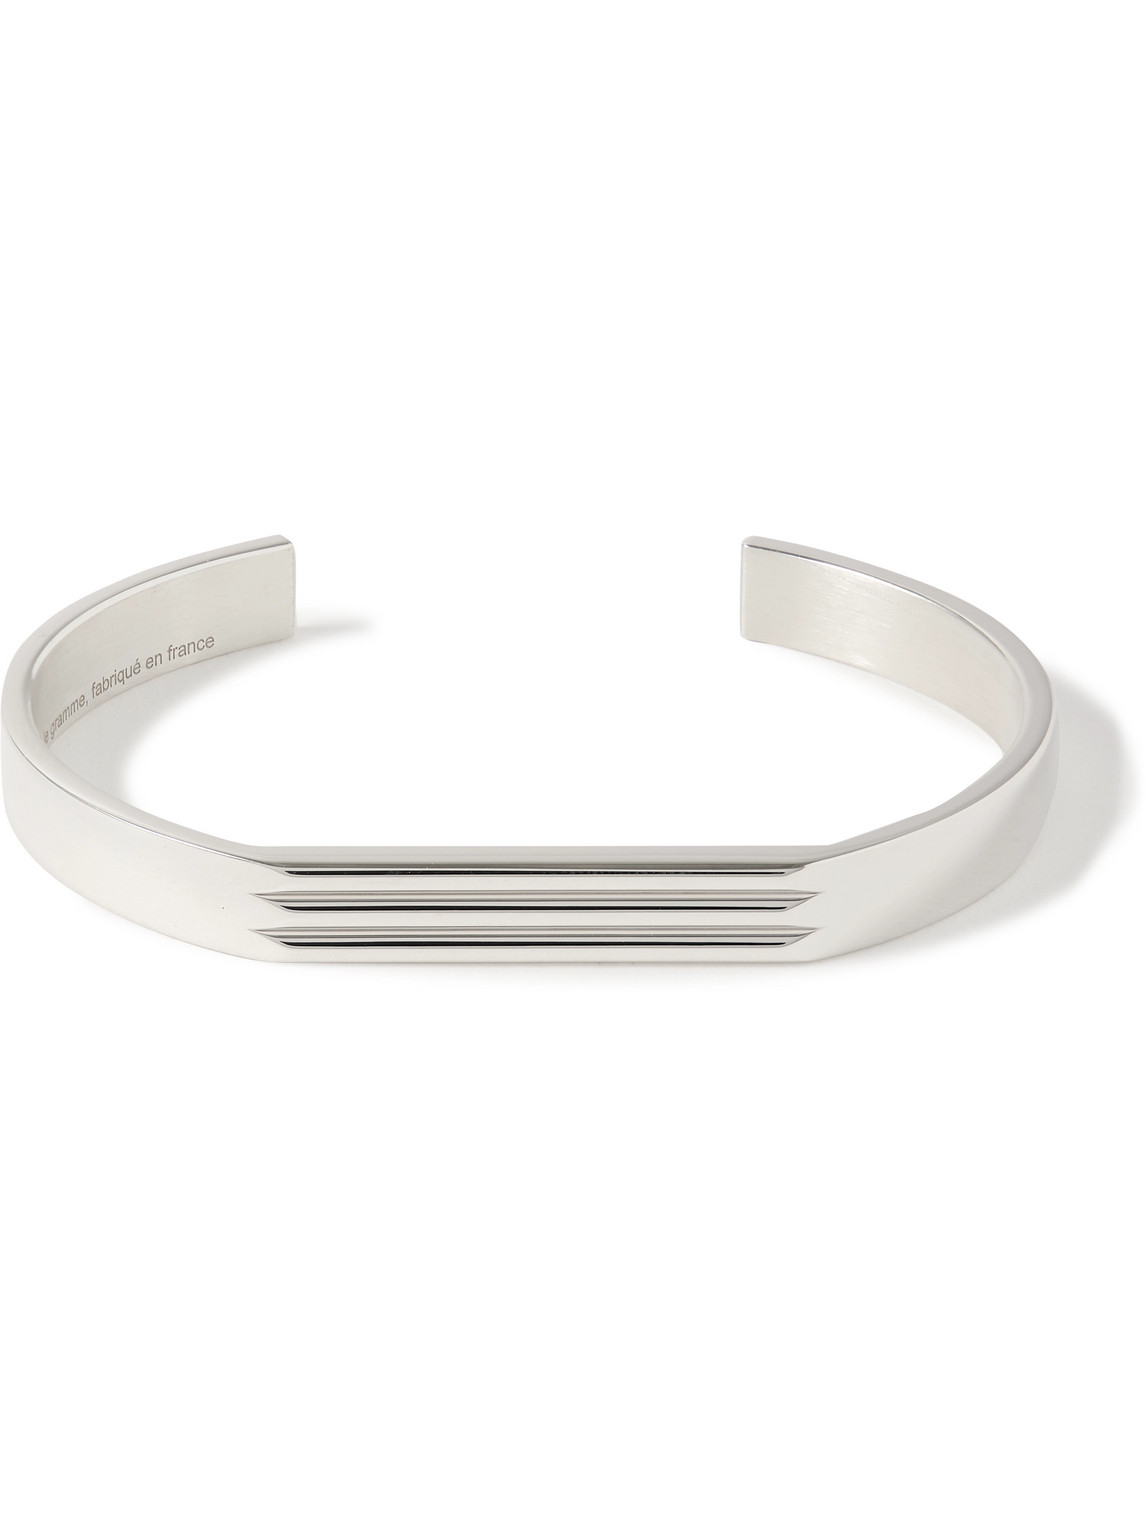 Godron 21g Recycled Sterling Silver Cuff